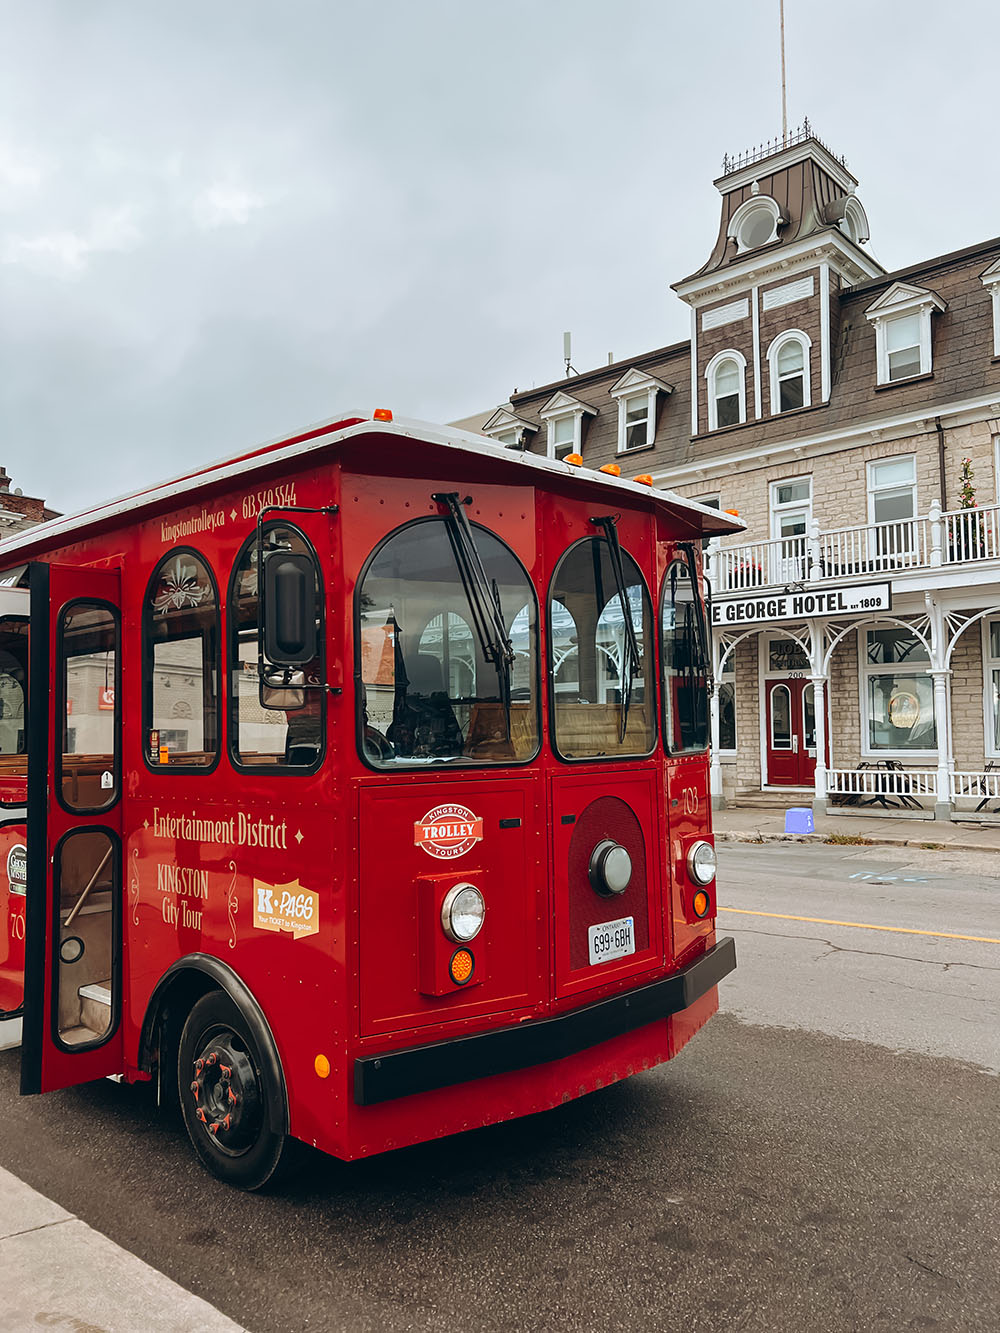 Planning a trip to Kingston, Ontario soon? This guide to the best things to do in Kingston is for you! From the top Kingston activities and attractions, to the must see sights, best restaurants, bars, and everything in between. You won’t want to miss this guide that will help you plan your perfect Kingston getaway. Pictured here: The Kingston Ghost & Mystery Trolley Tour